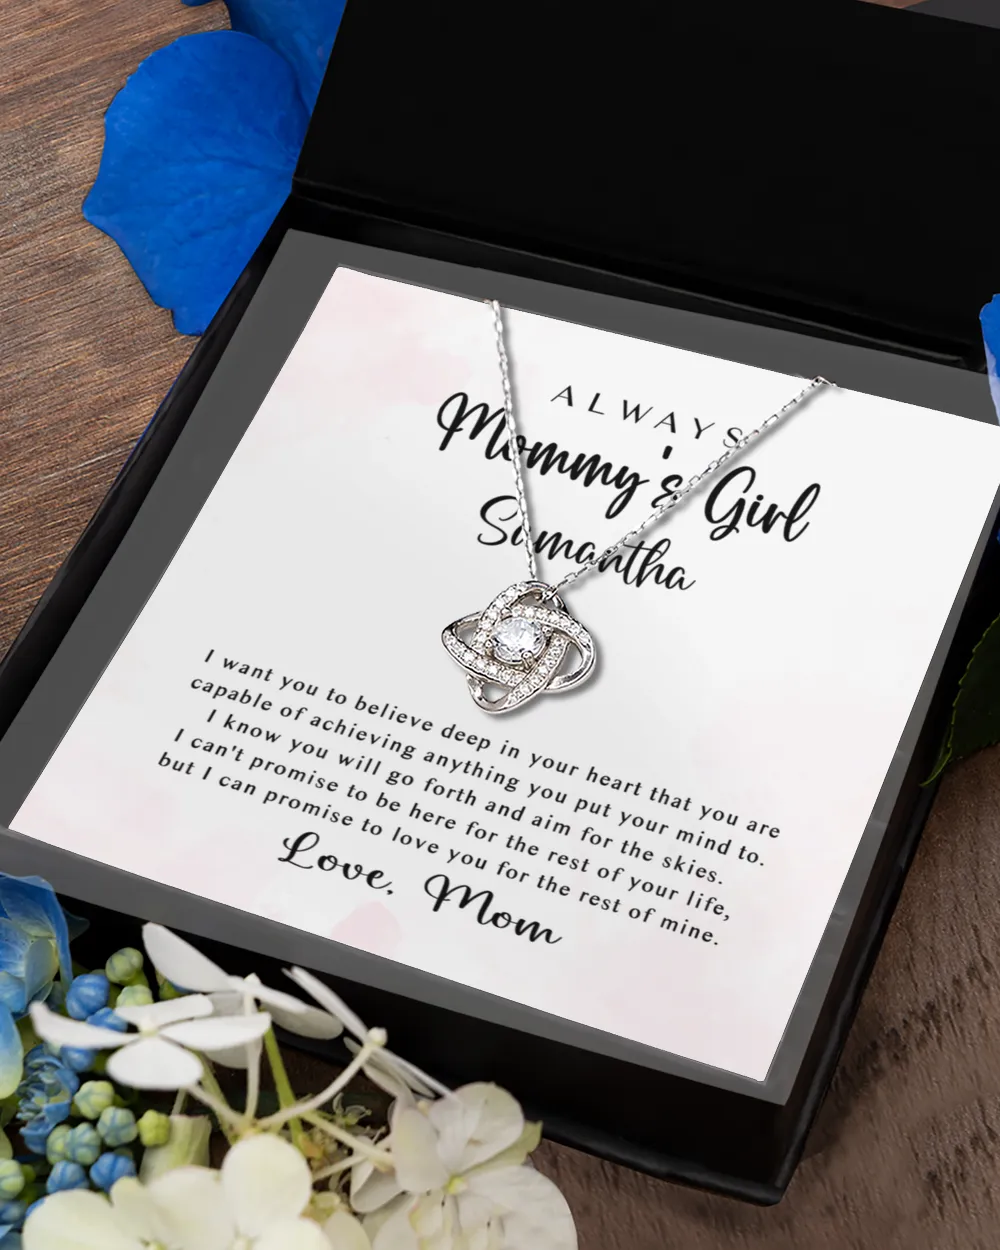 Personalized Daughter Necklace - "Always Mommy's Girl - Believe, Achieve, Soar"